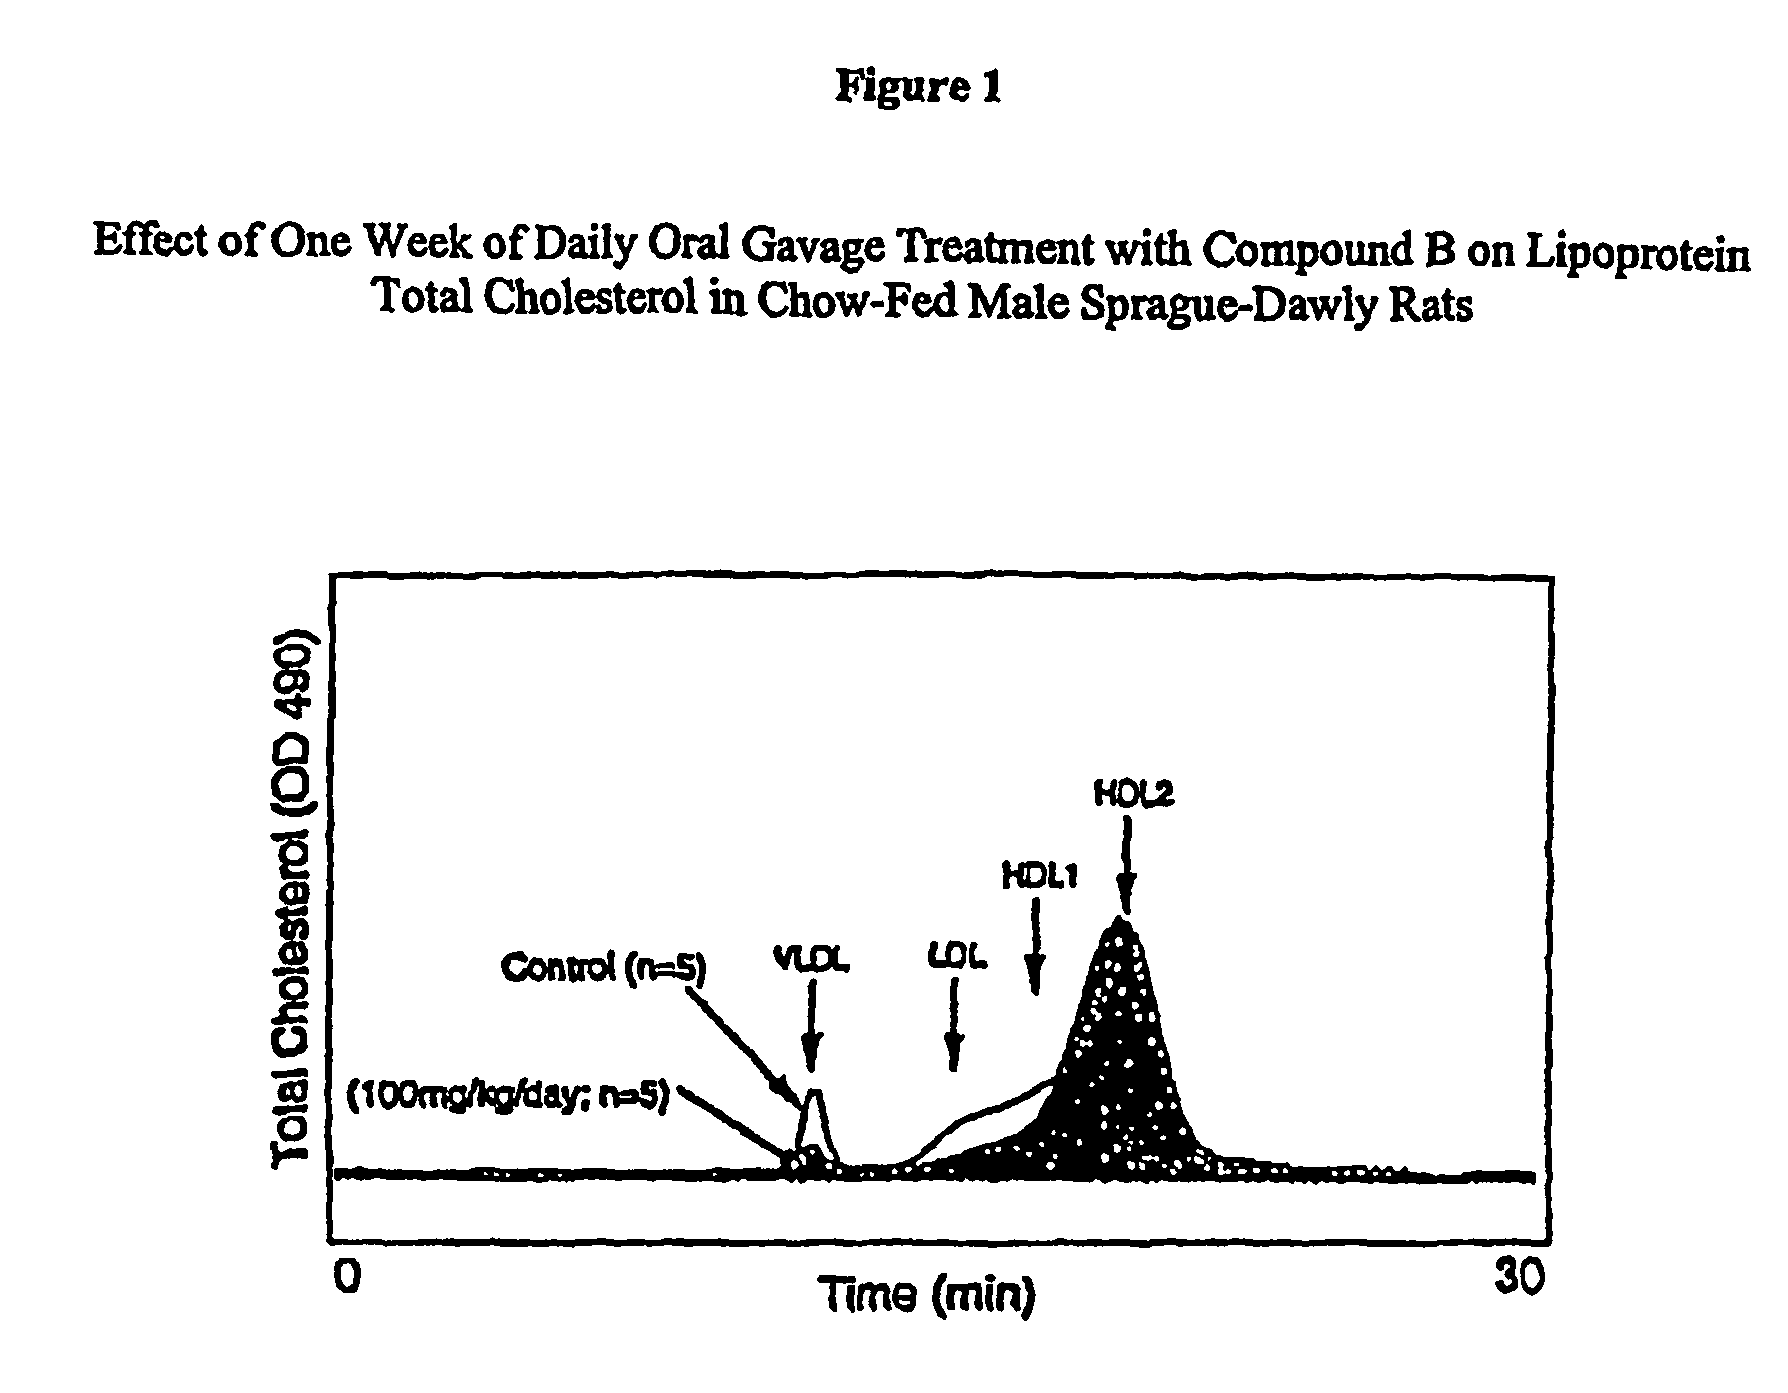 Ketone compounds and compositions for cholesterol management and related uses